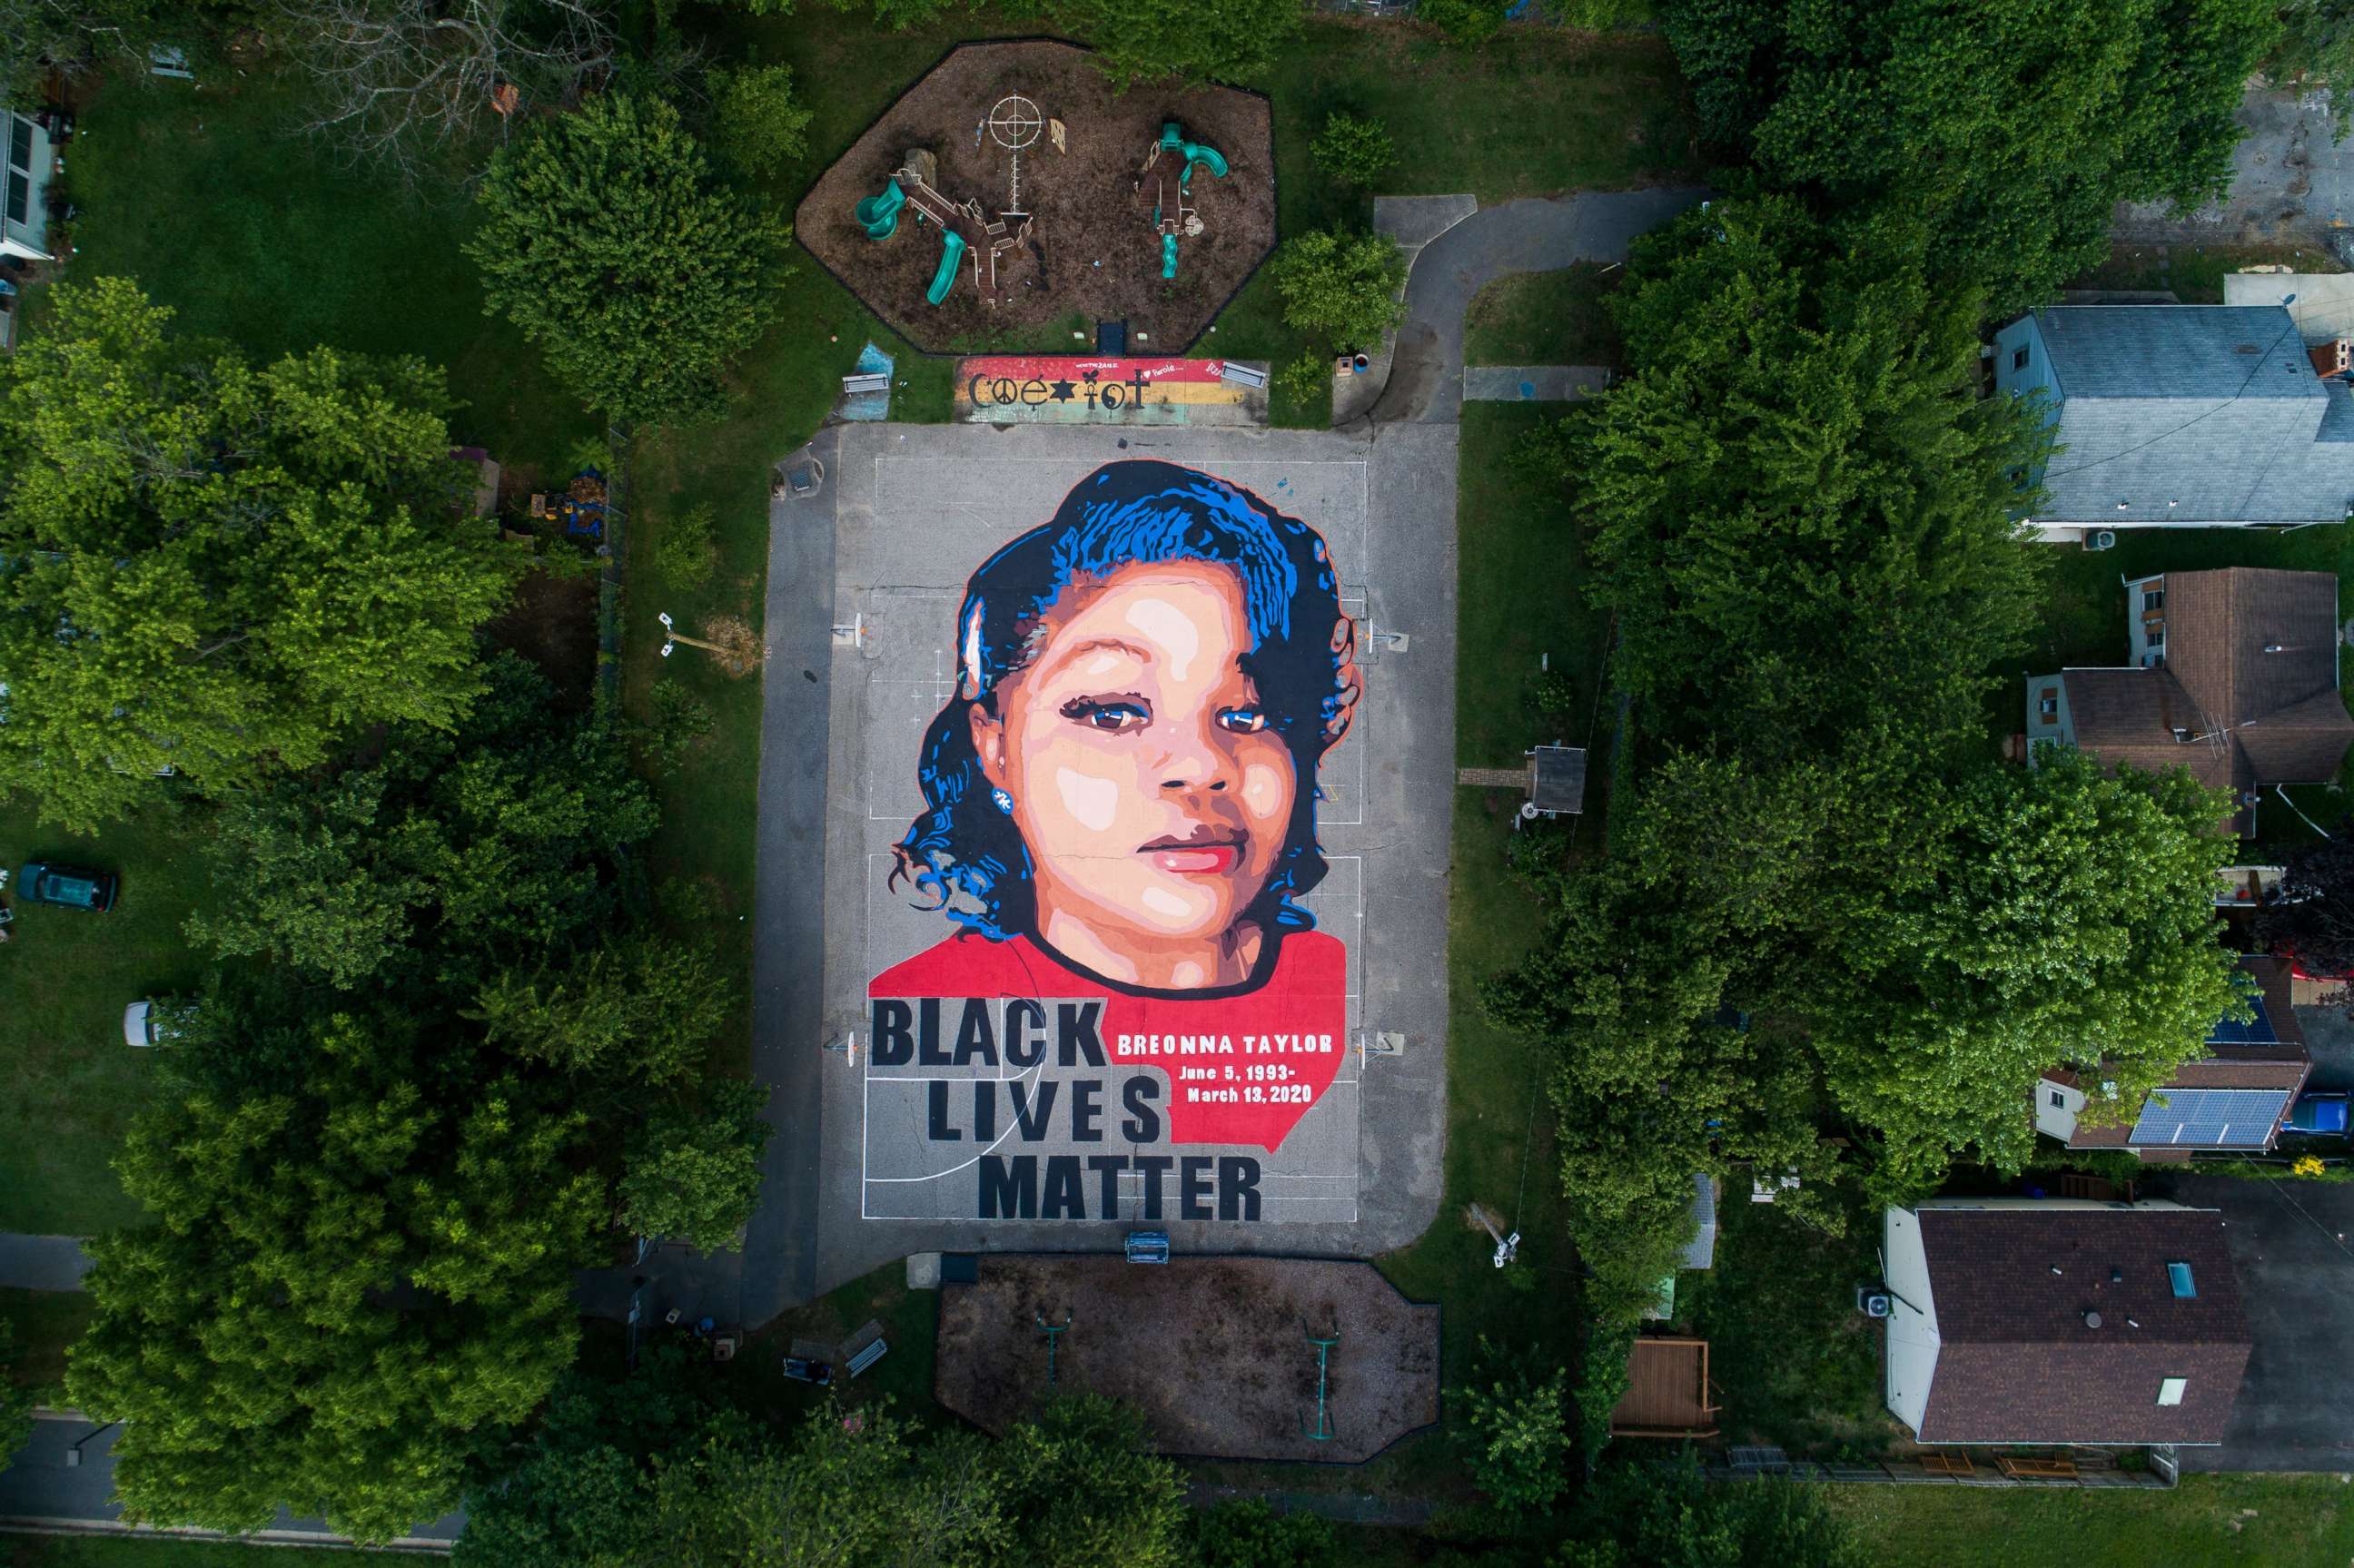 PHOTO: An image shows a mural of Breonna Taylor, who was killed in her own apartment by Louisville, Kentucky police officers, on two basketball courts in Annapolis, Maryland, July 8, 2020.